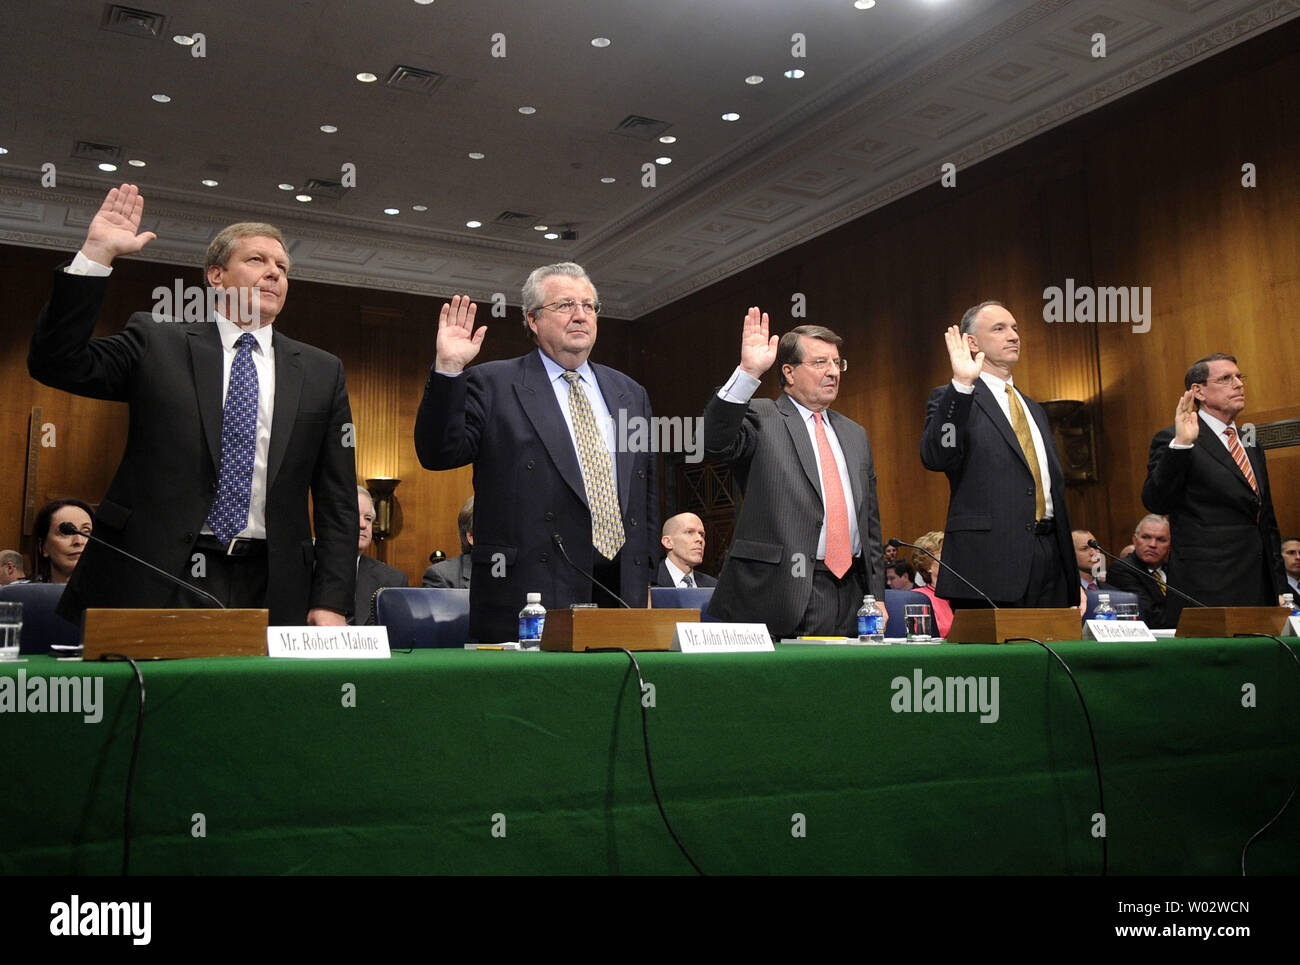 From left to right, Robert Malone, chairman and president of BP America Inc., John Hofmeister, president of Shell Oil Company, Peter Robertson, vice chairman of the Chevron Corporation, John Lowe, executive vice president of ConocoPhillips, and Stephen Simon, senior vice president of the Exxon Mobil Corporation,  are sworn in prior to a Judiciary Committee hearing on the rising price of oil in Washington on May 21, 2008. (UPI Photo/Kevin Dietsch) Stock Photo